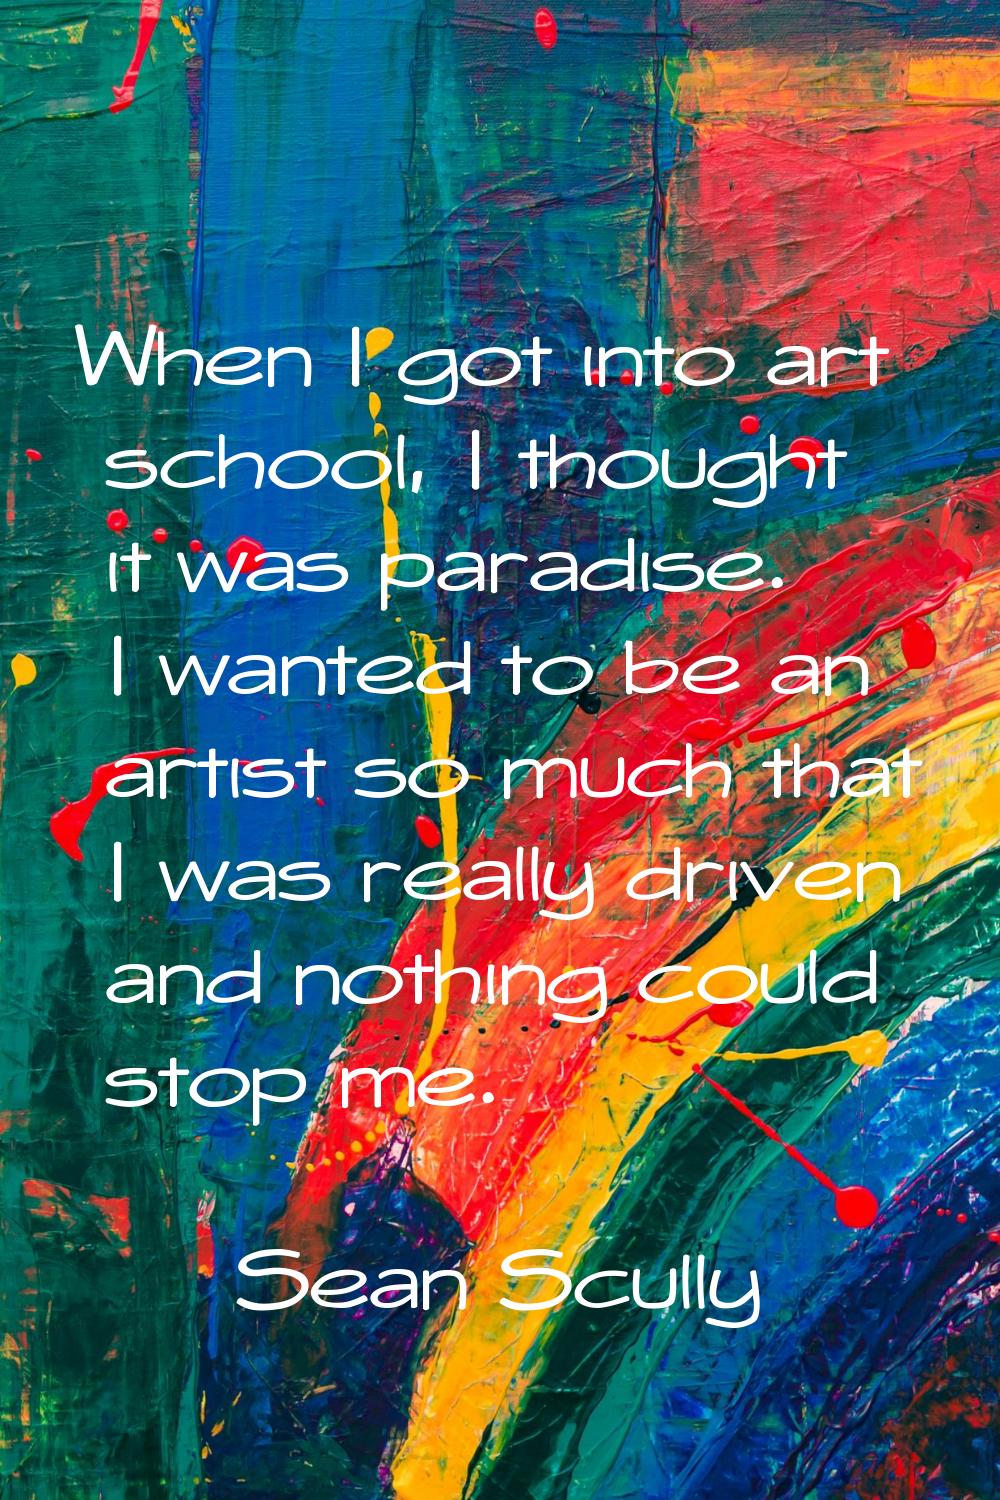 When I got into art school, I thought it was paradise. I wanted to be an artist so much that I was 